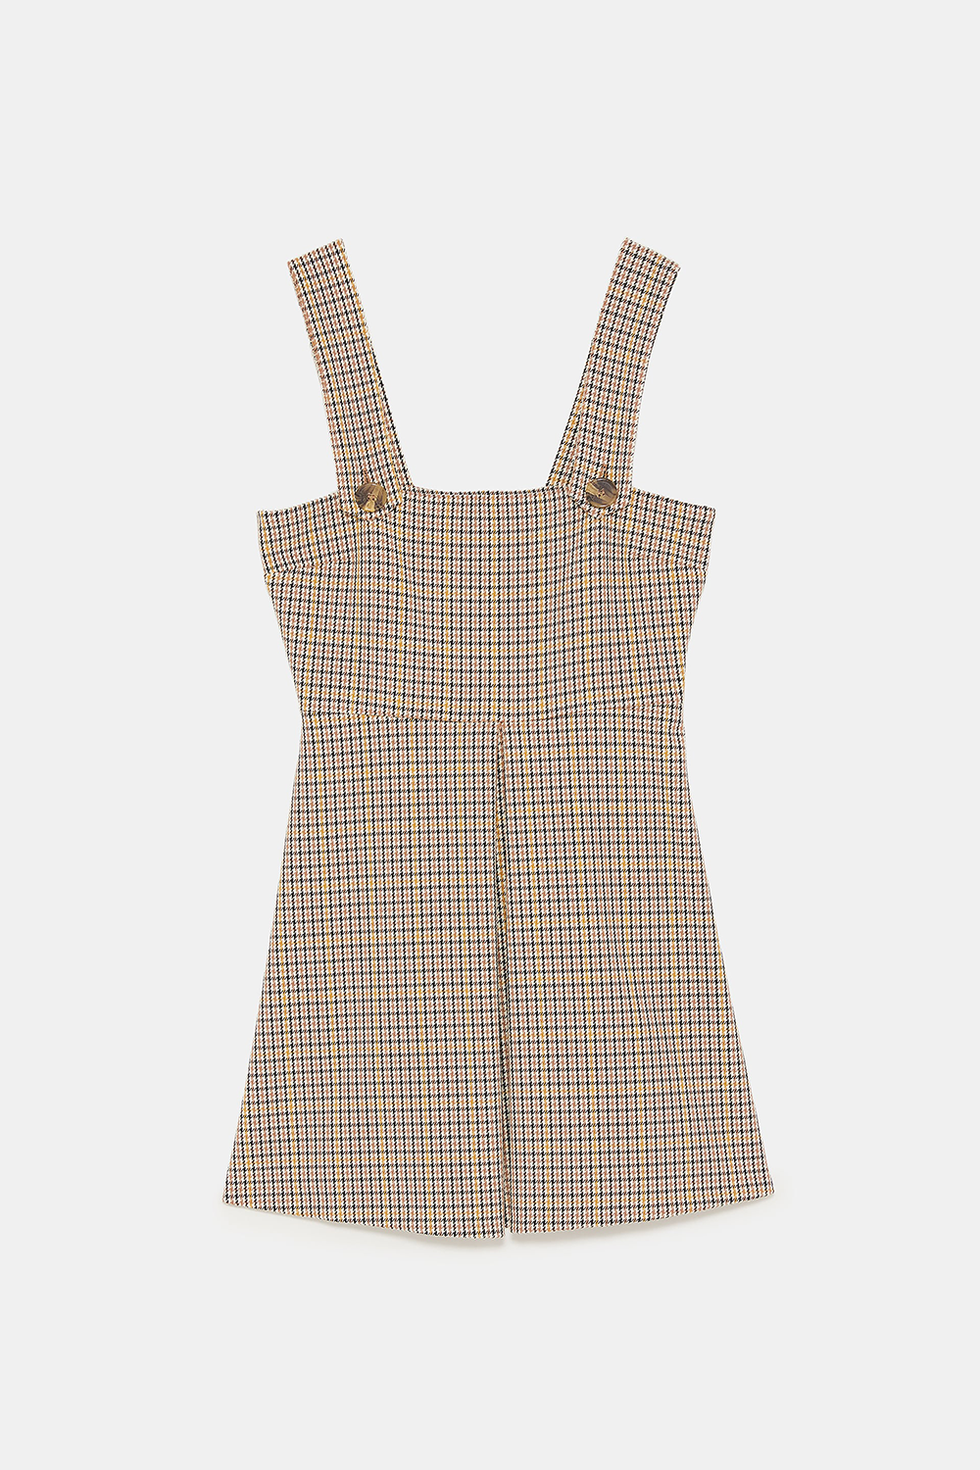 Clothing, White, Beige, Dress, Pattern, Plaid, Design, Outerwear, Day dress, camisoles, 